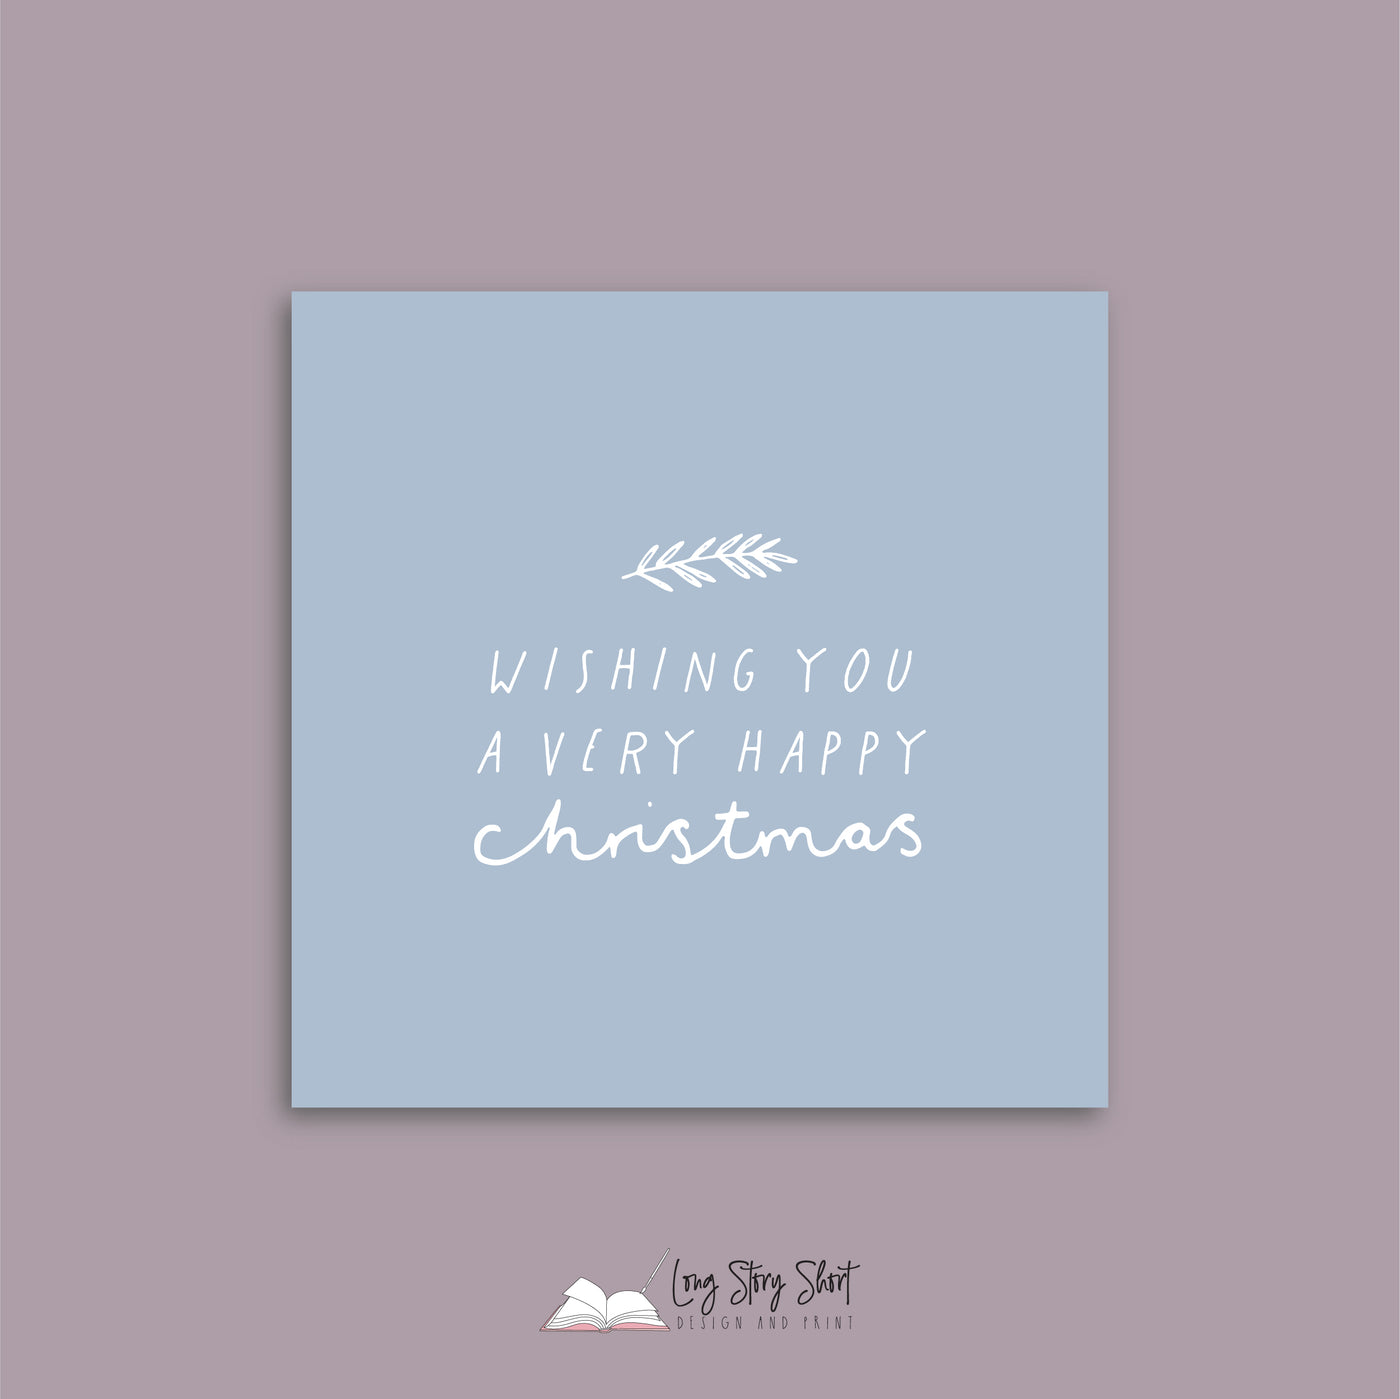 Blue Have a Leafy Christmas Vinyl Label Pack Square Matte/Gloss